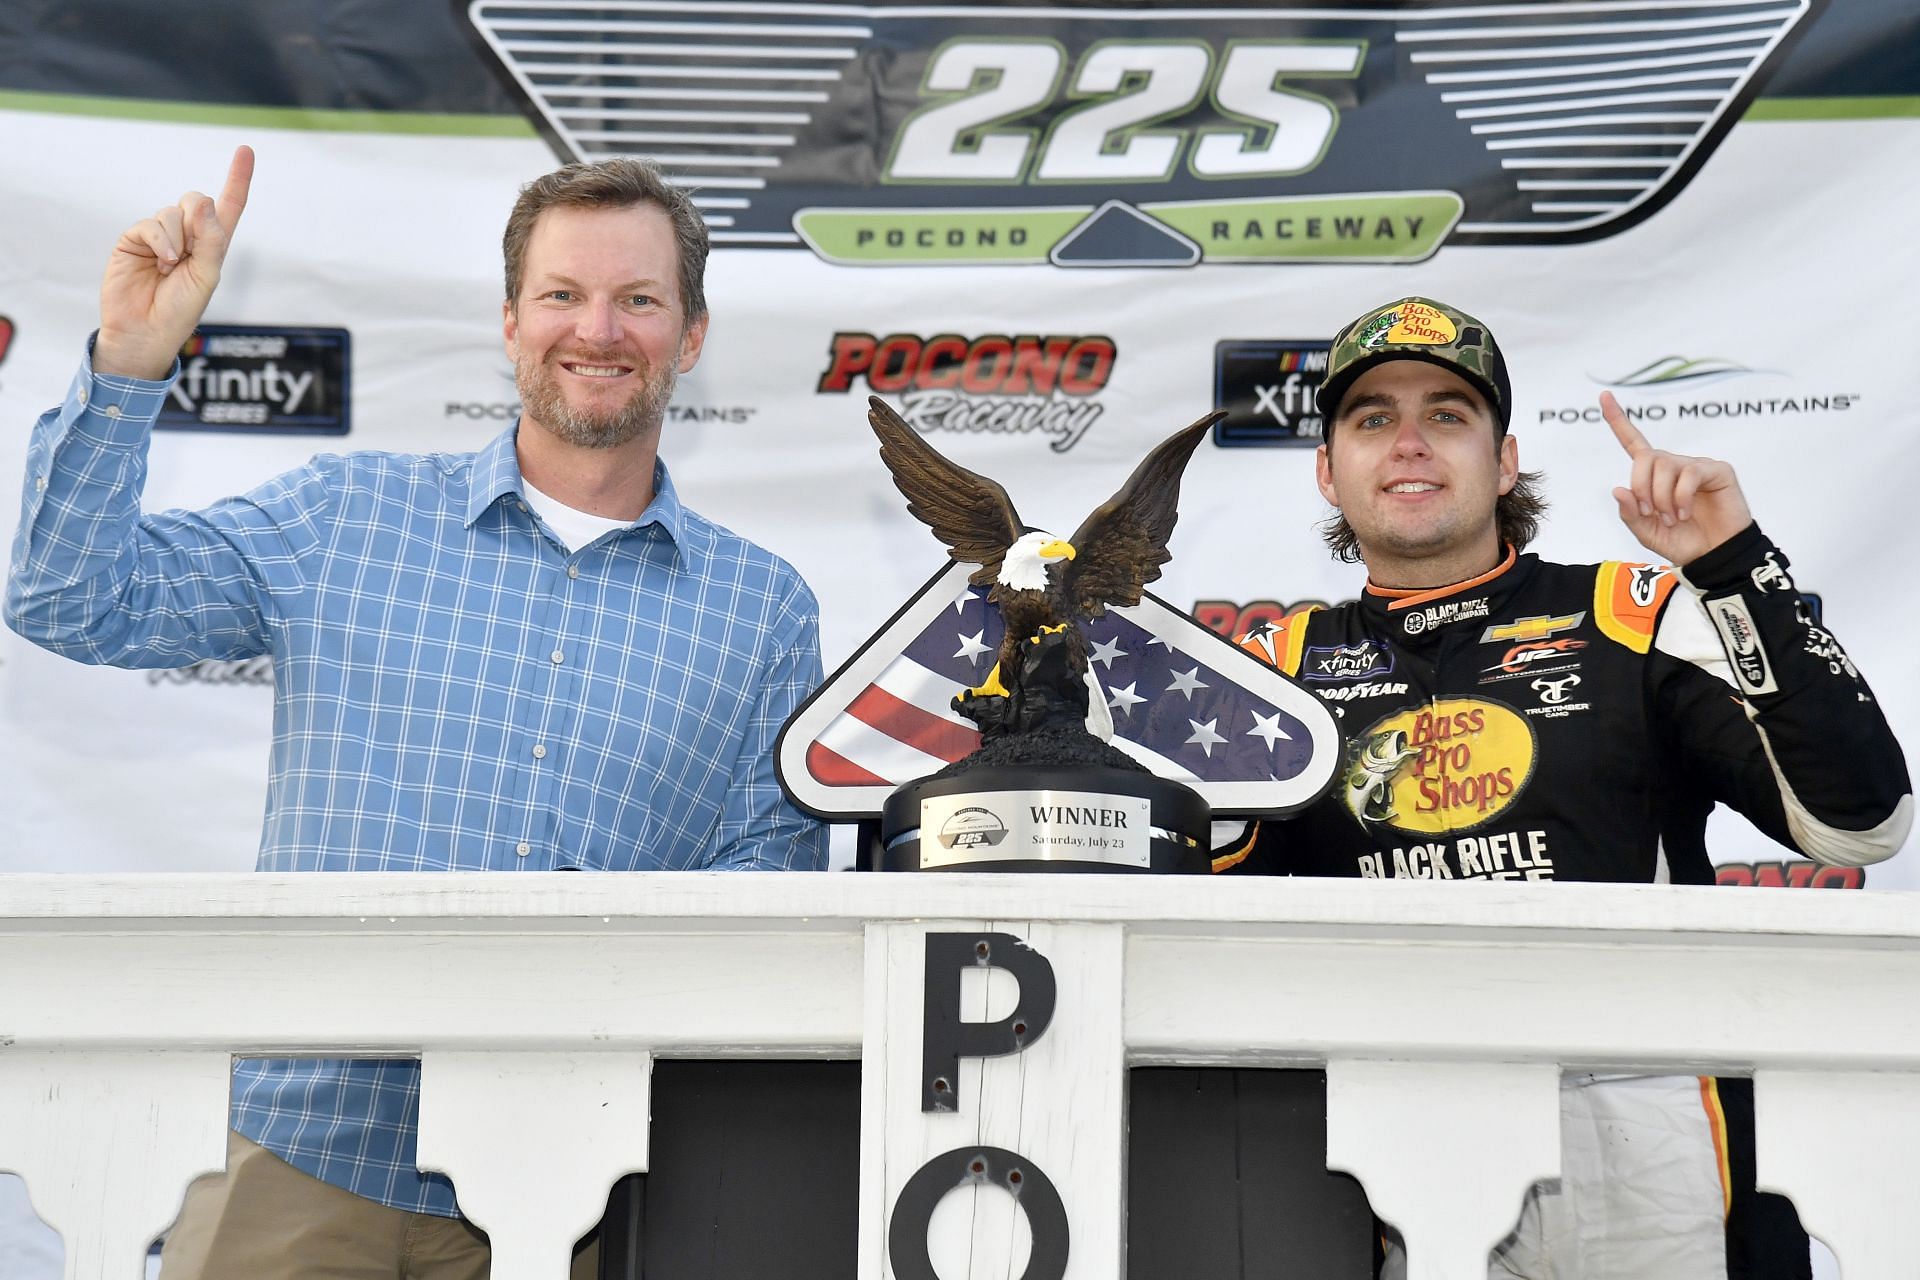 JR Motorsports owner Dale Earnhardt Jr. (left) celebrates in victory lane after winning the NASCAR Xfinity Series Explore the Pocono Mountains 225 at Pocono Raceway